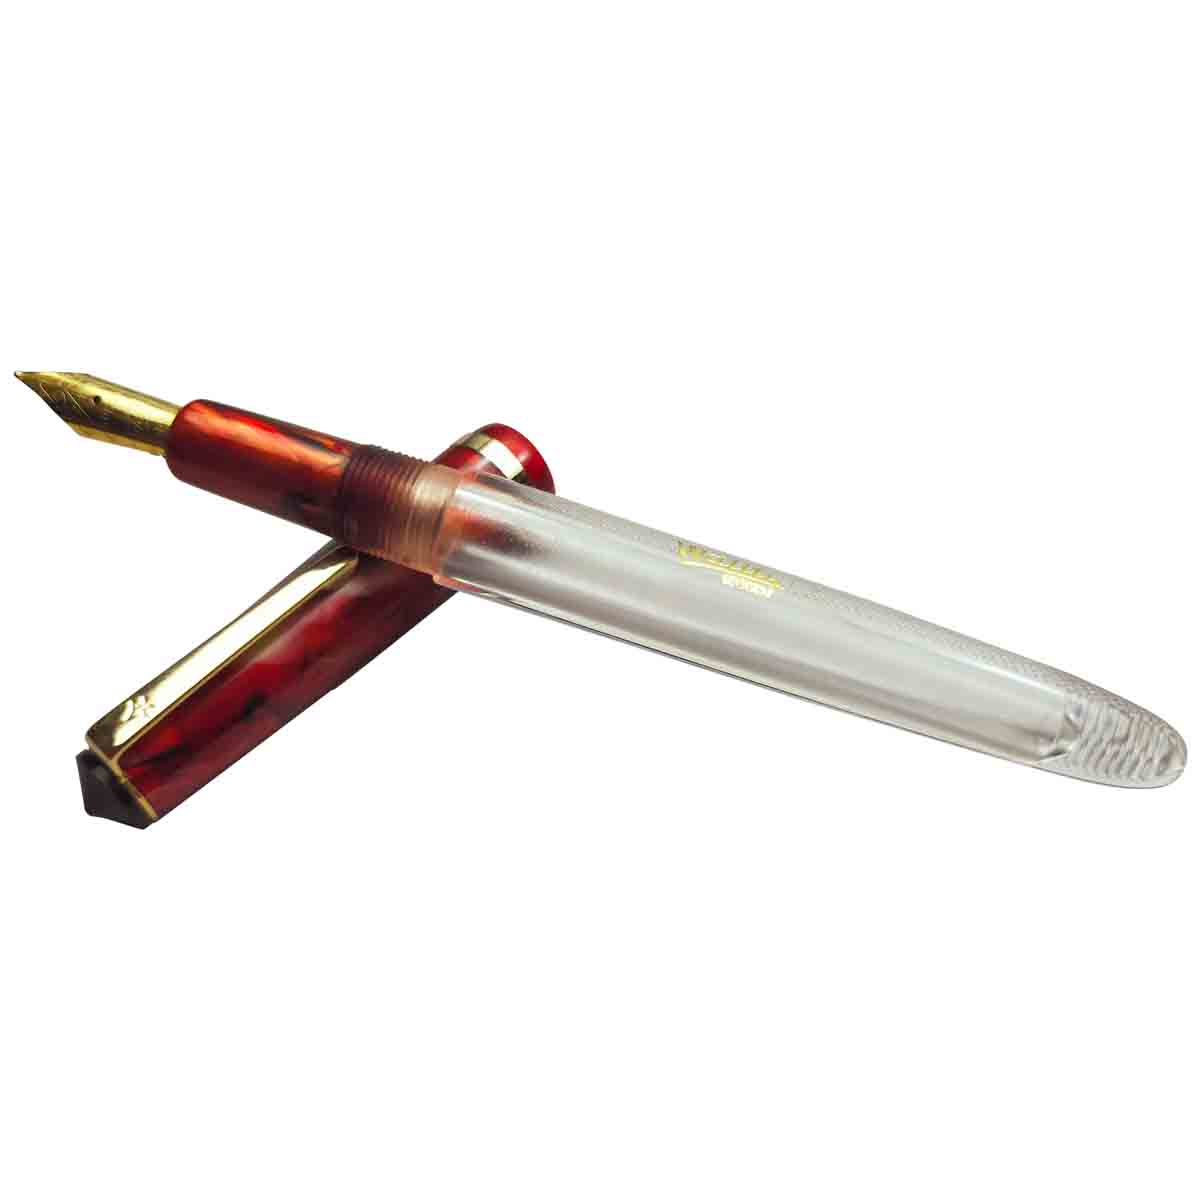 Airmail 64T -  Wality  Model: 13854 Transparent body with red color wood finish cap with golden clip fine tip fountain pen